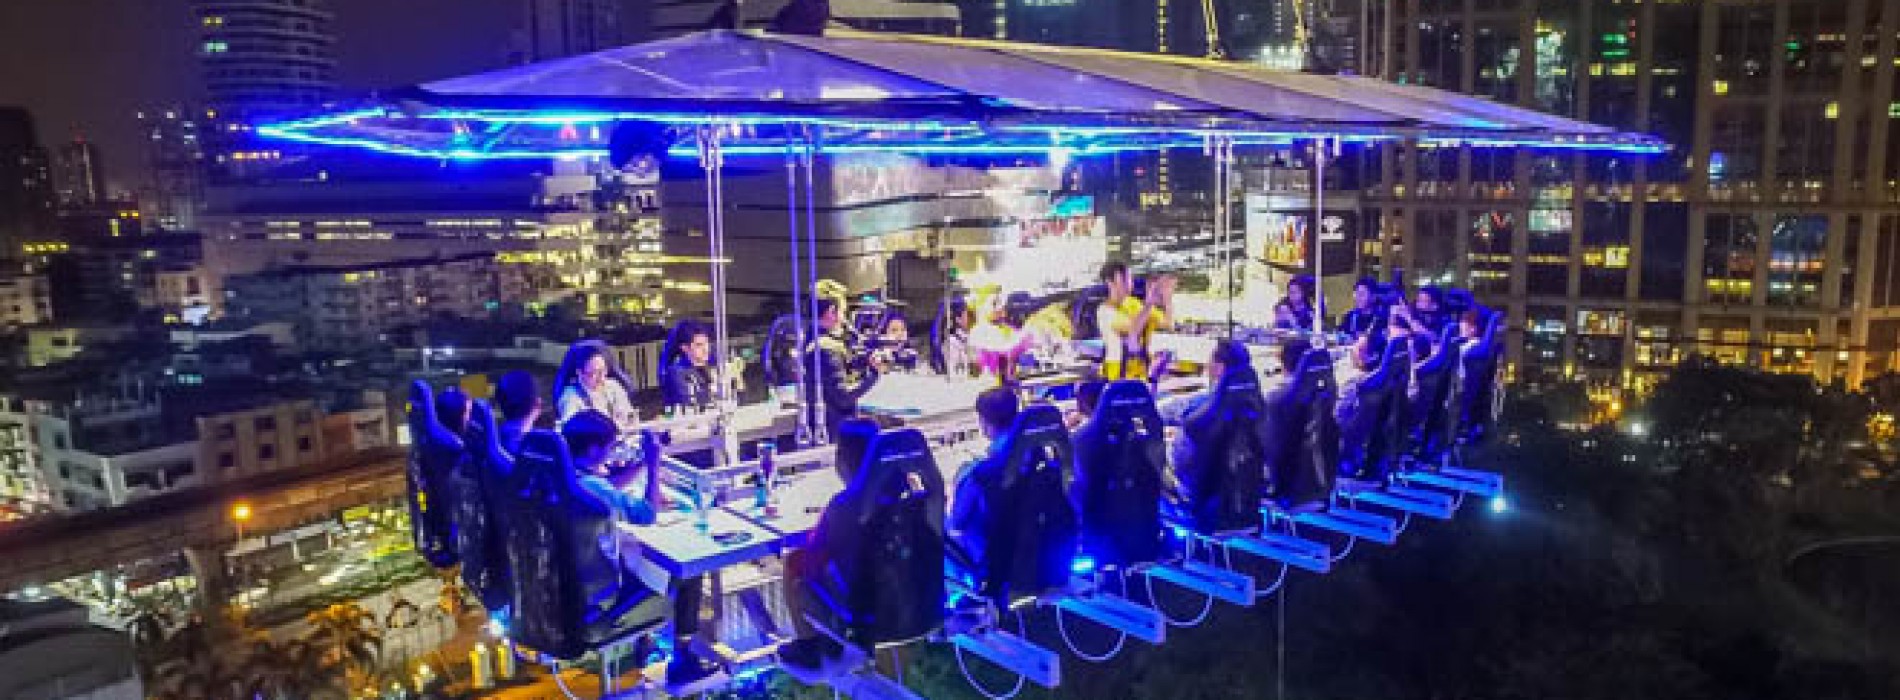 Dinner in the Sky takes off in Thailand